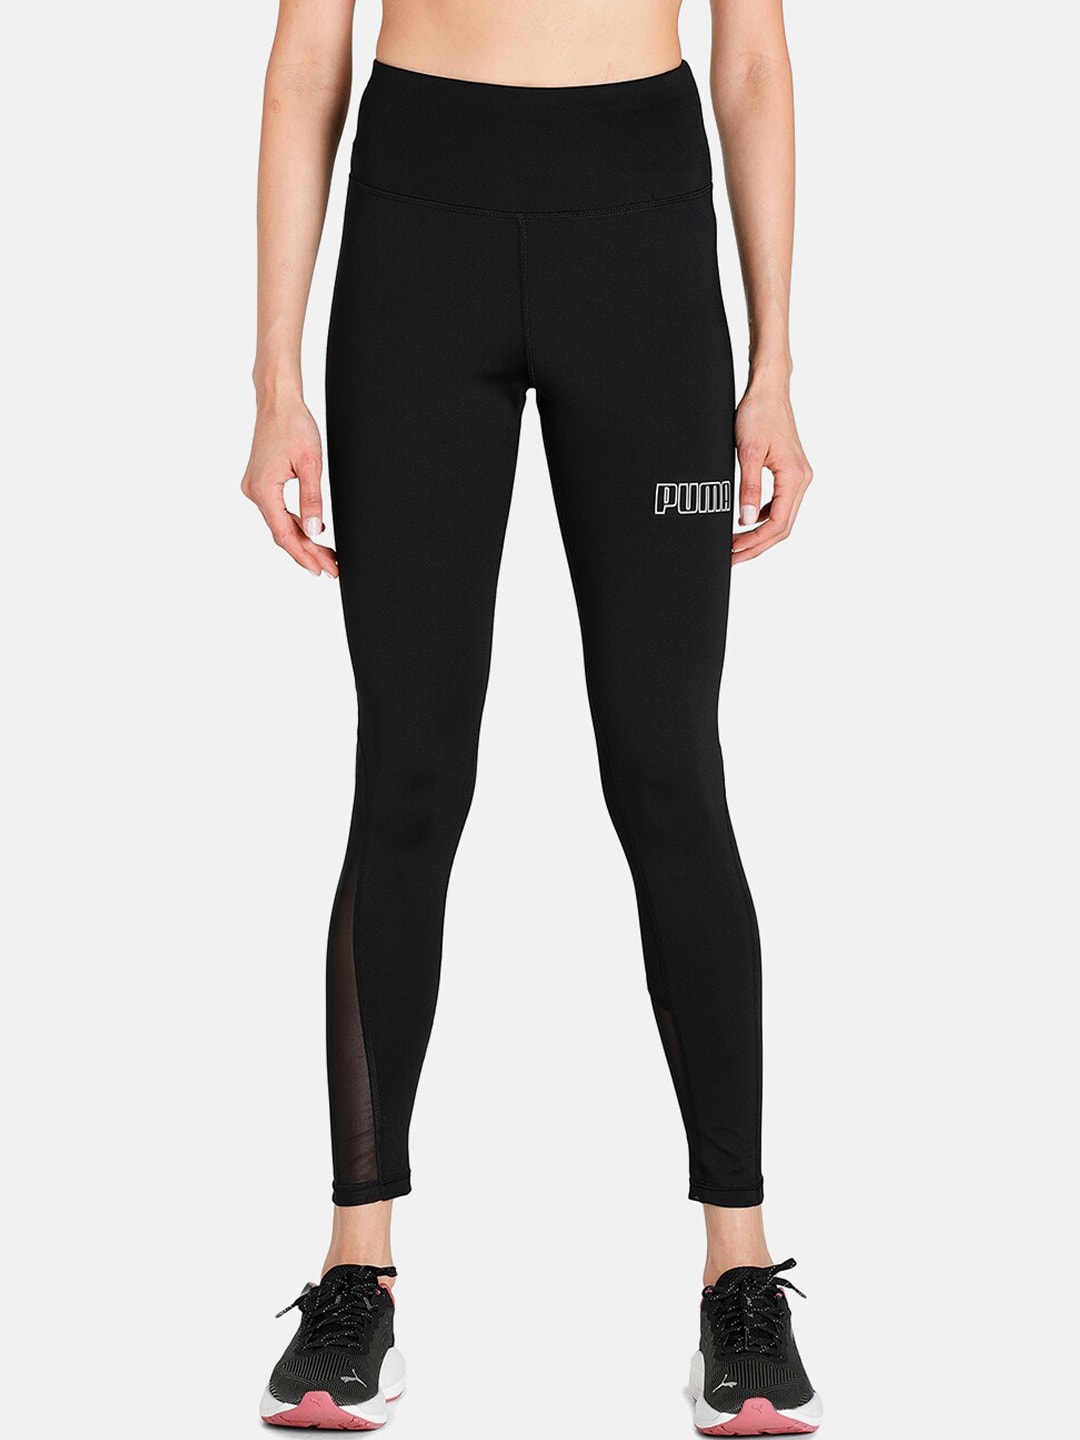 Puma Women Black Solid Active Essential Tight Fit Tights Price in India